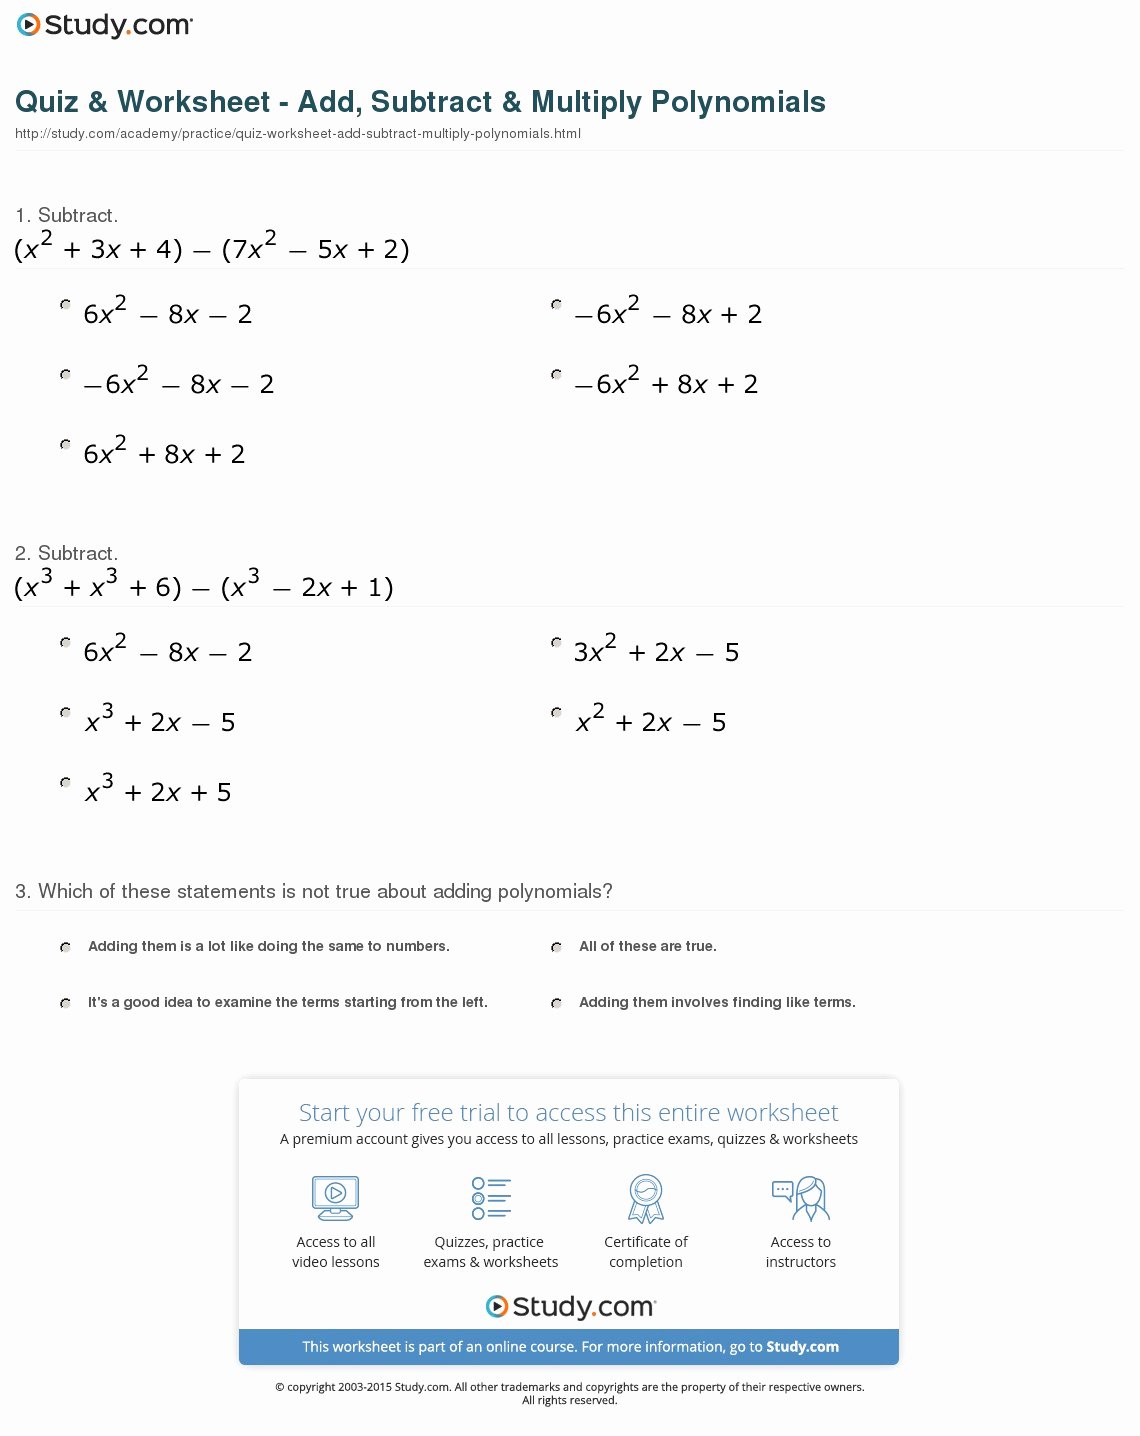 Multiplying Monomials Worksheet Answers Awesome Quiz &amp; Worksheet Add Subtract &amp; Multiply Polynomials